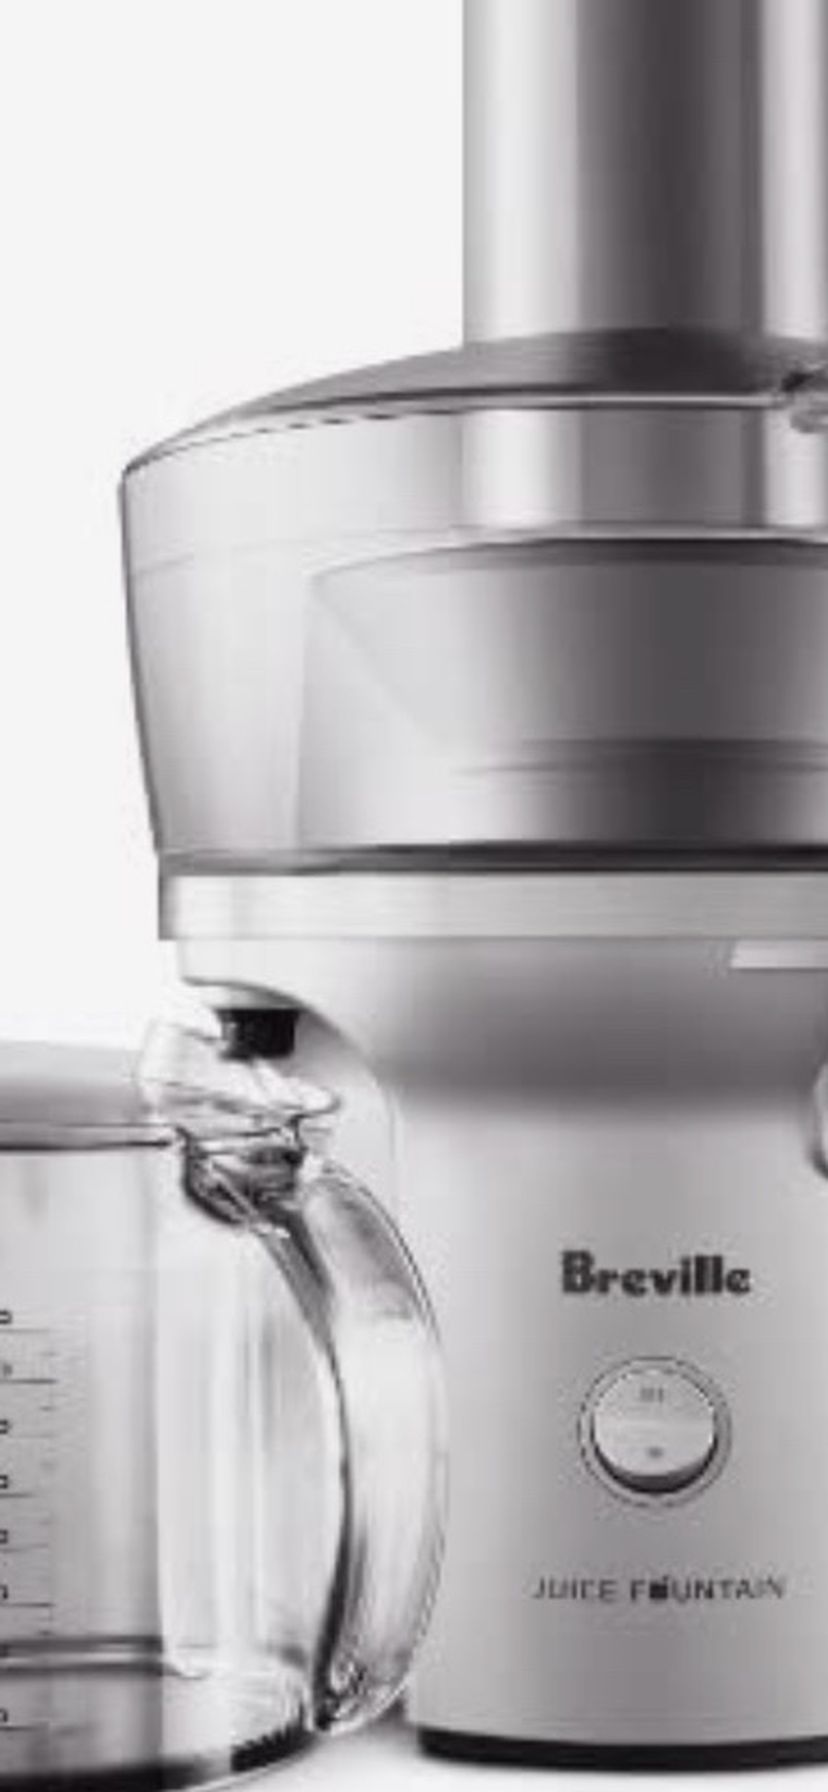 BRAND NEW Breville Juice Fountain Compact Juicer